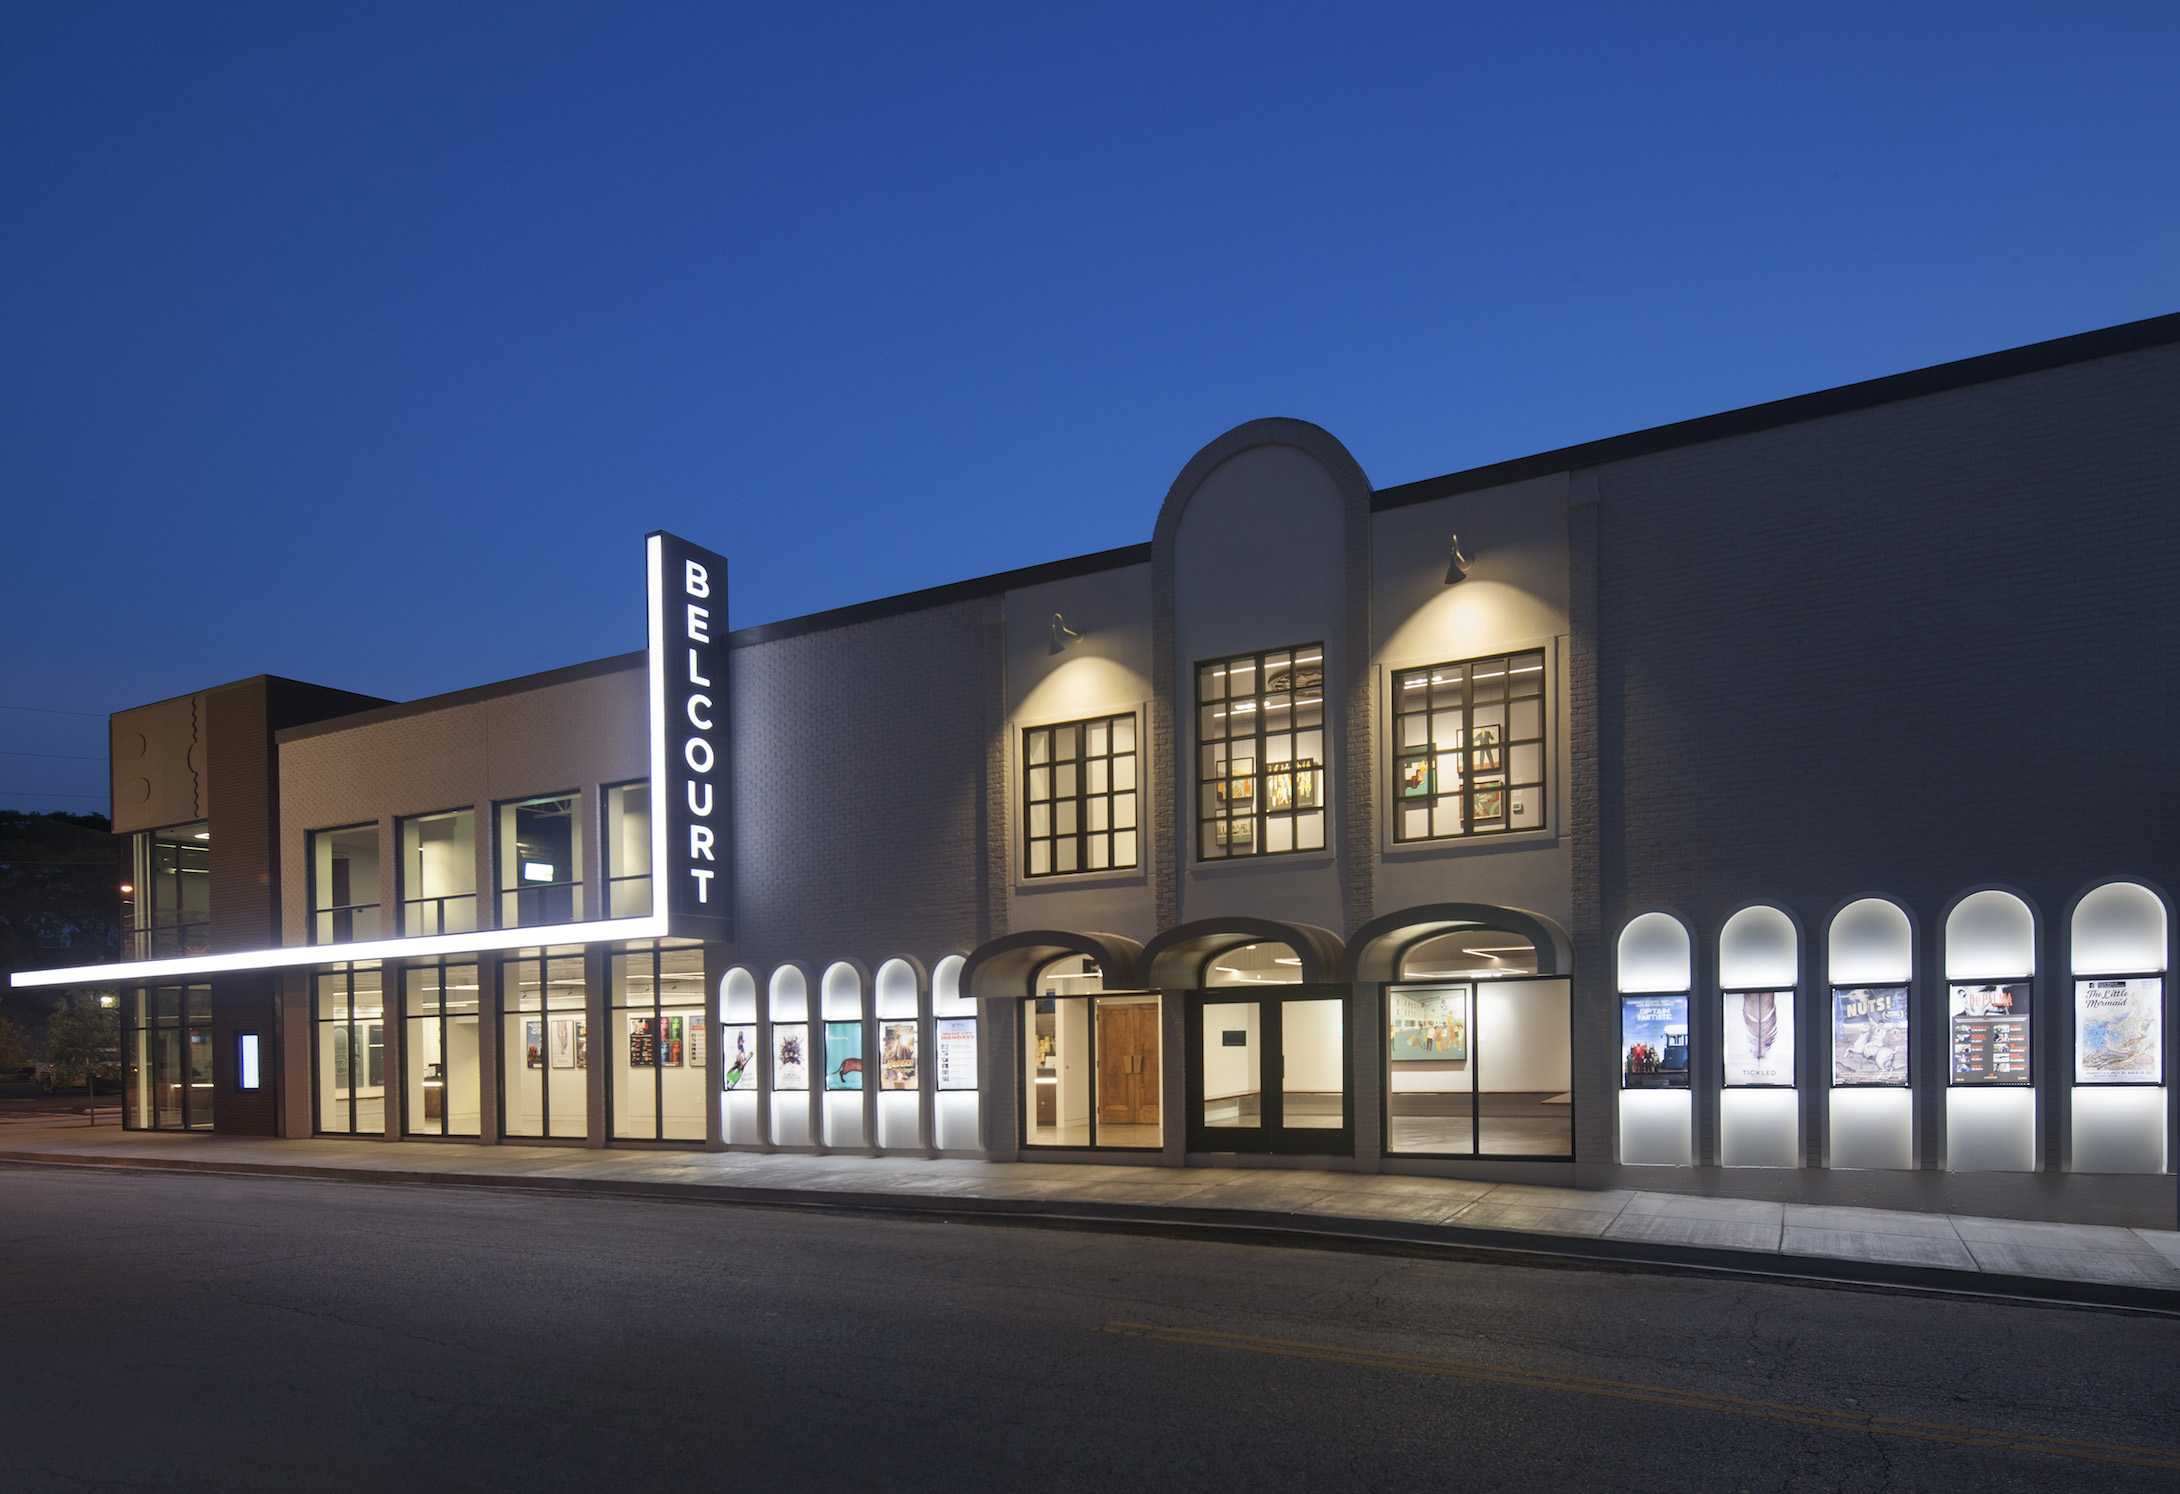 TOMMY - The Belcourt Theatre